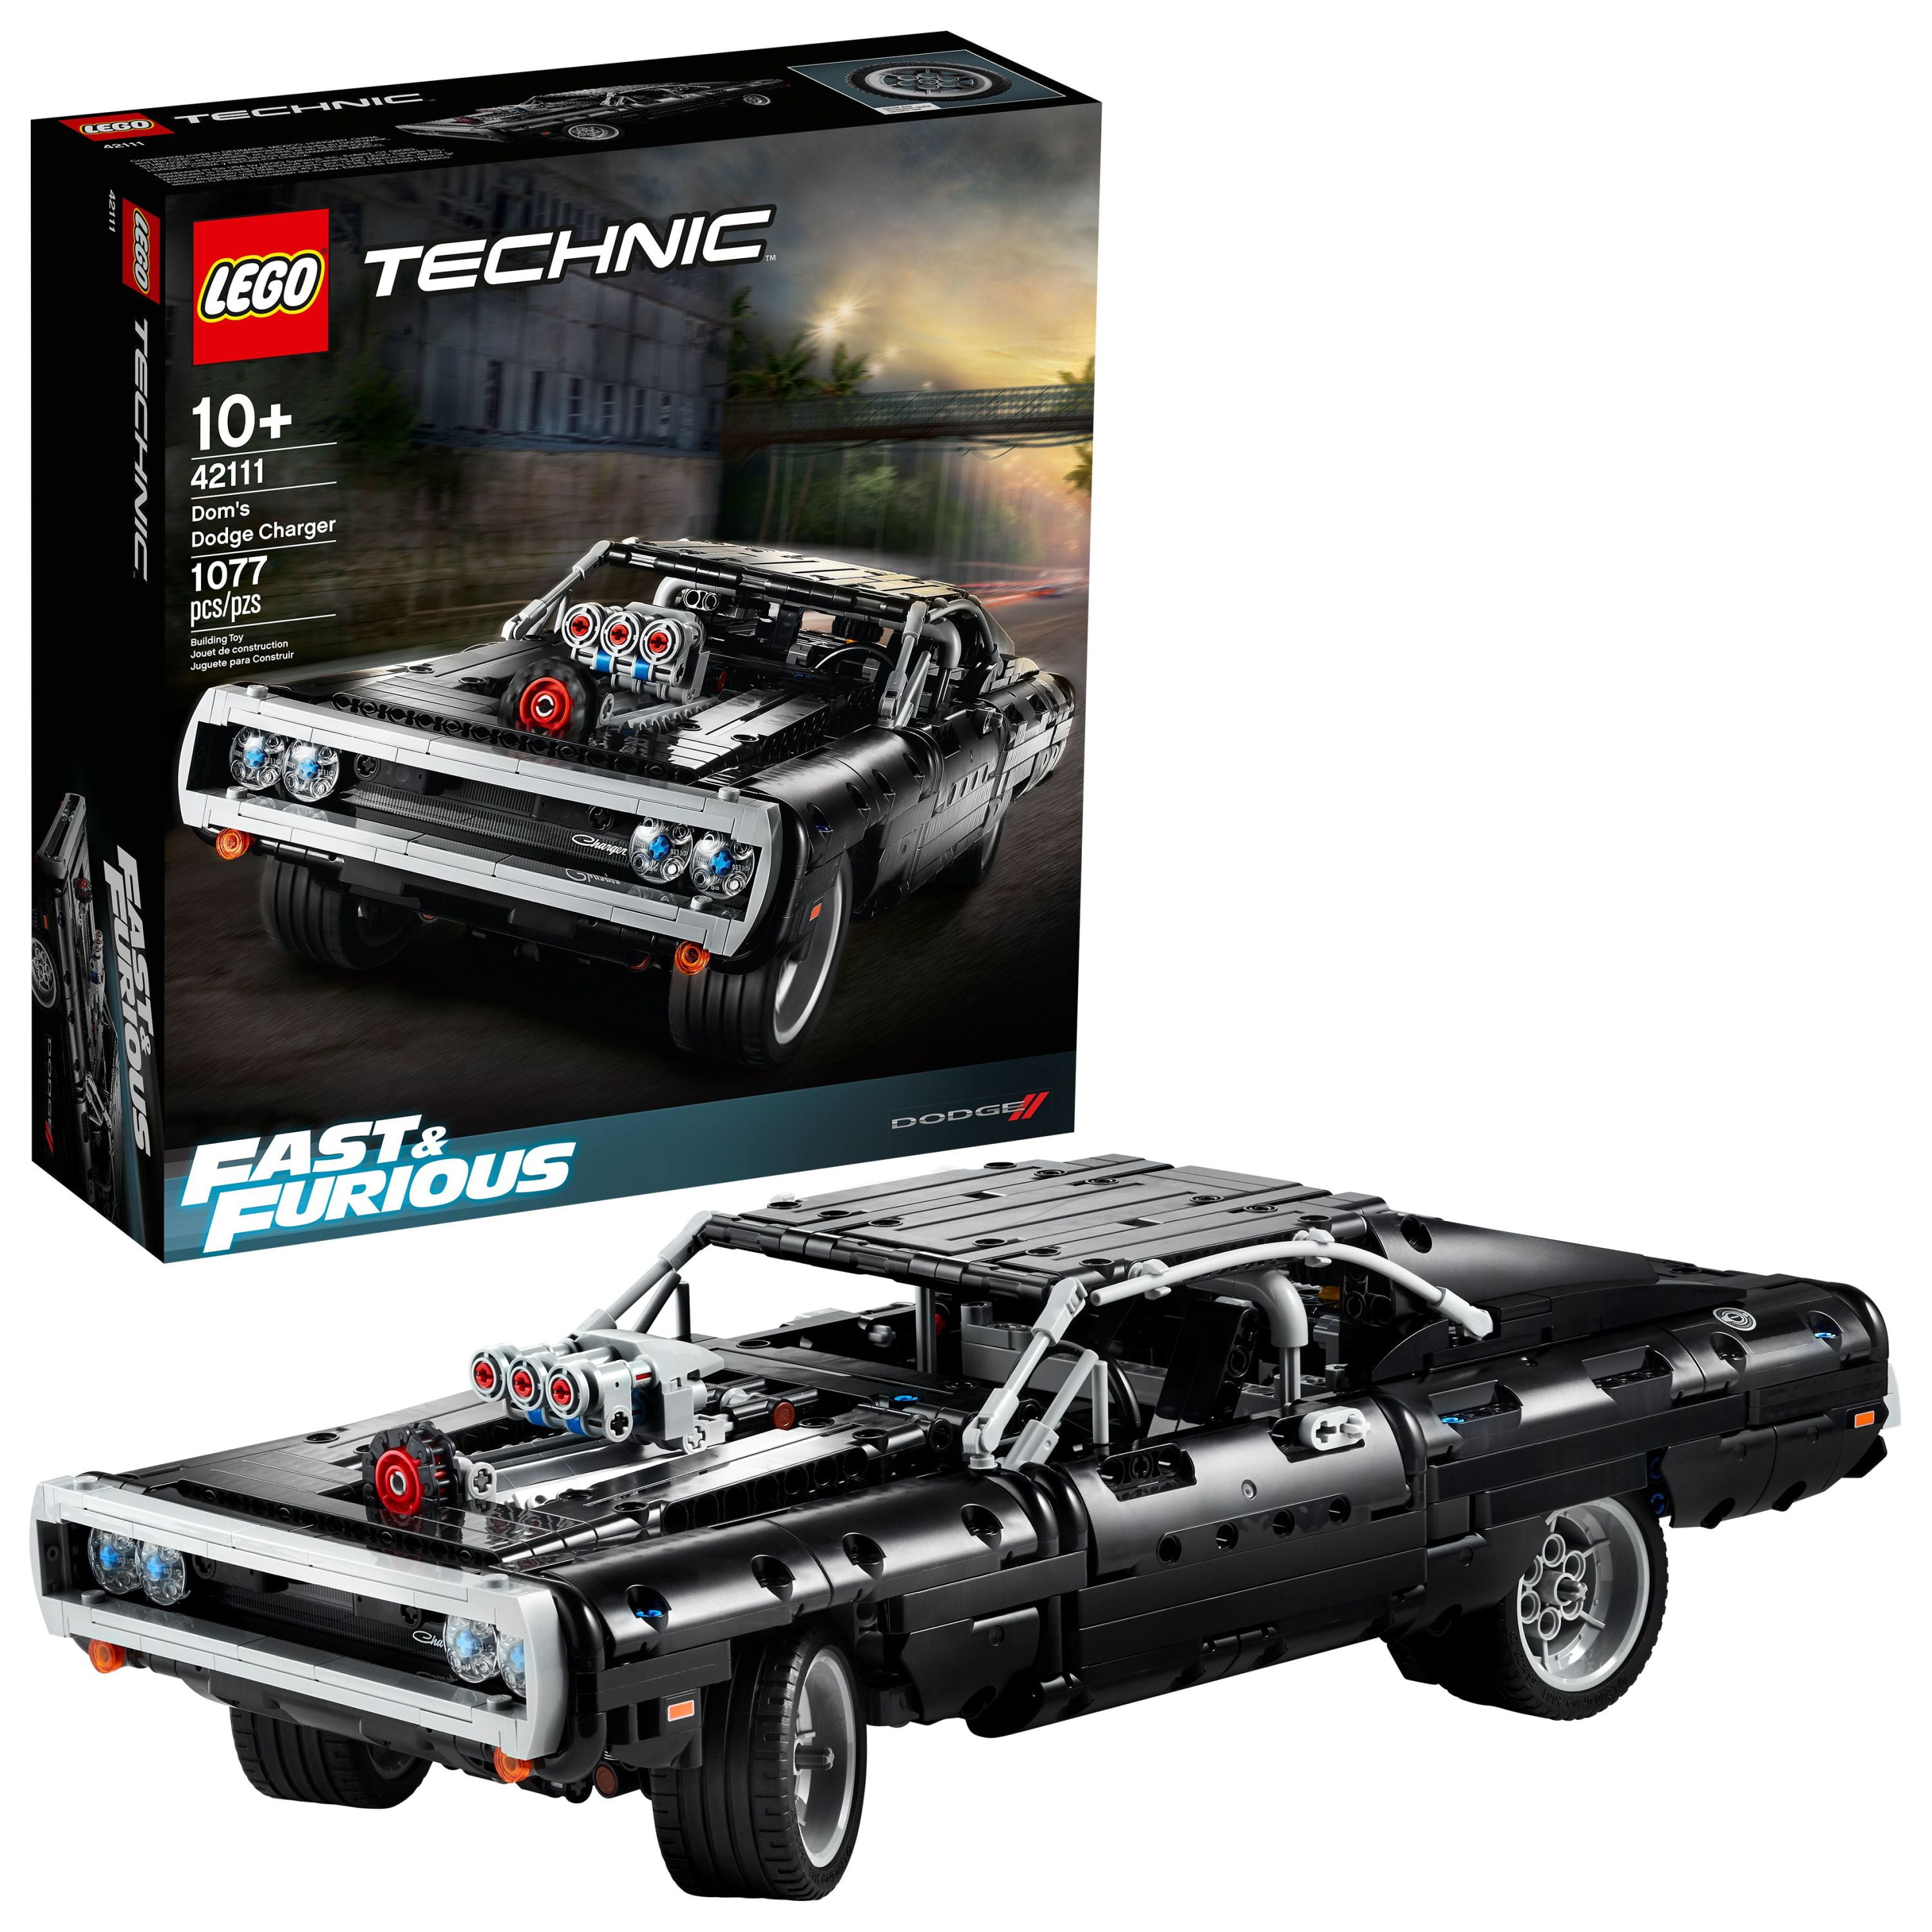 LEGO Technic Fast & Furious Dom's Dodge Charger 42111, Toy Racing